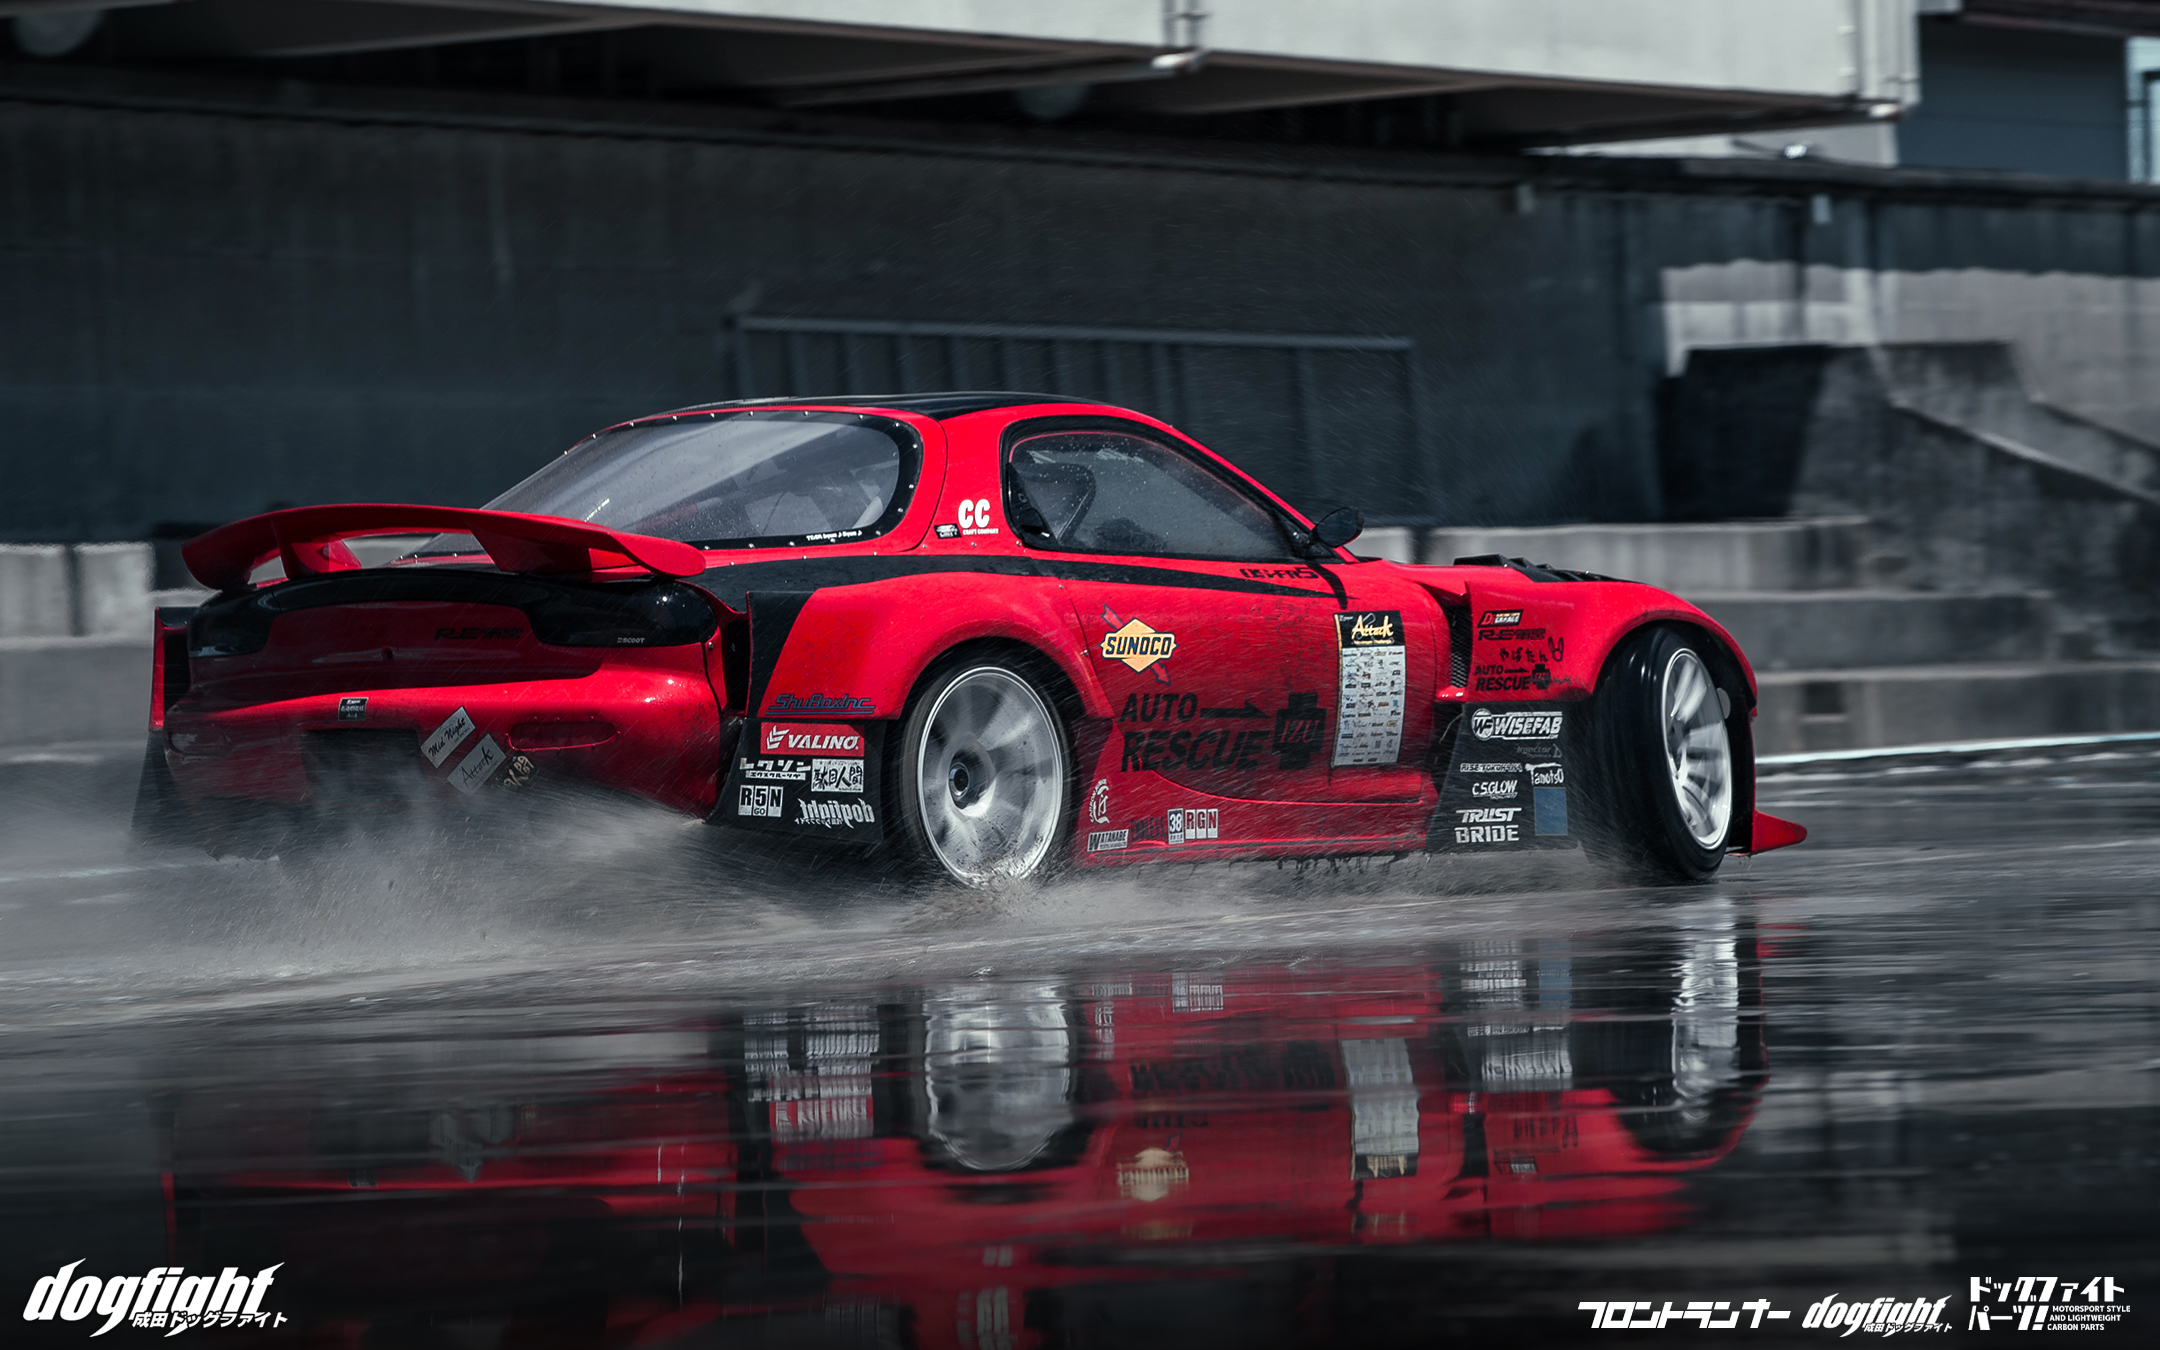 General 2160x1350 drift drift cars Mazda RX-7 wet road red cars car car racing vehicle reflection water Japanese